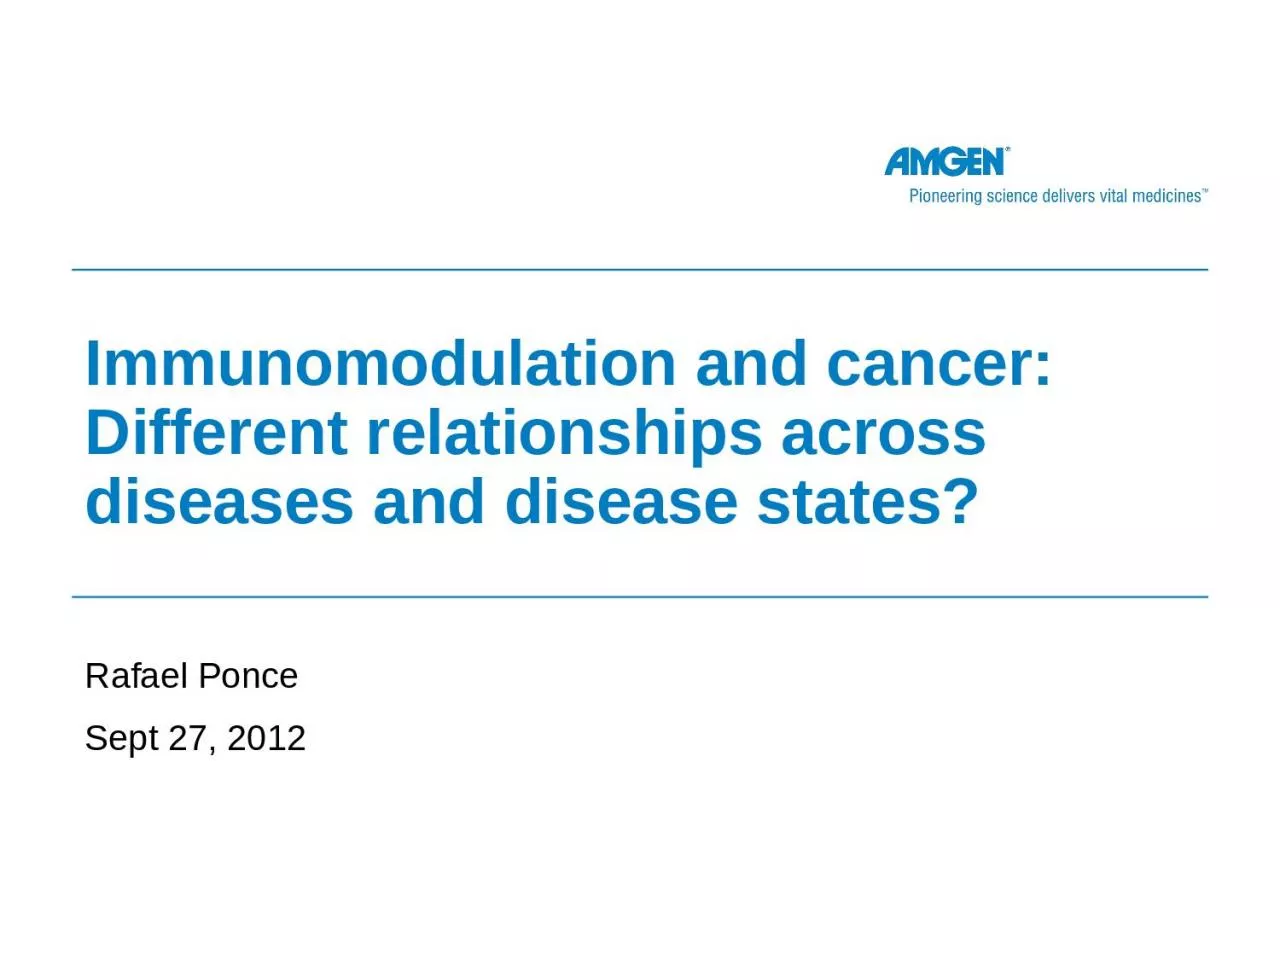 Immunomodulation and cancer: Different relationships across diseases and disease states?